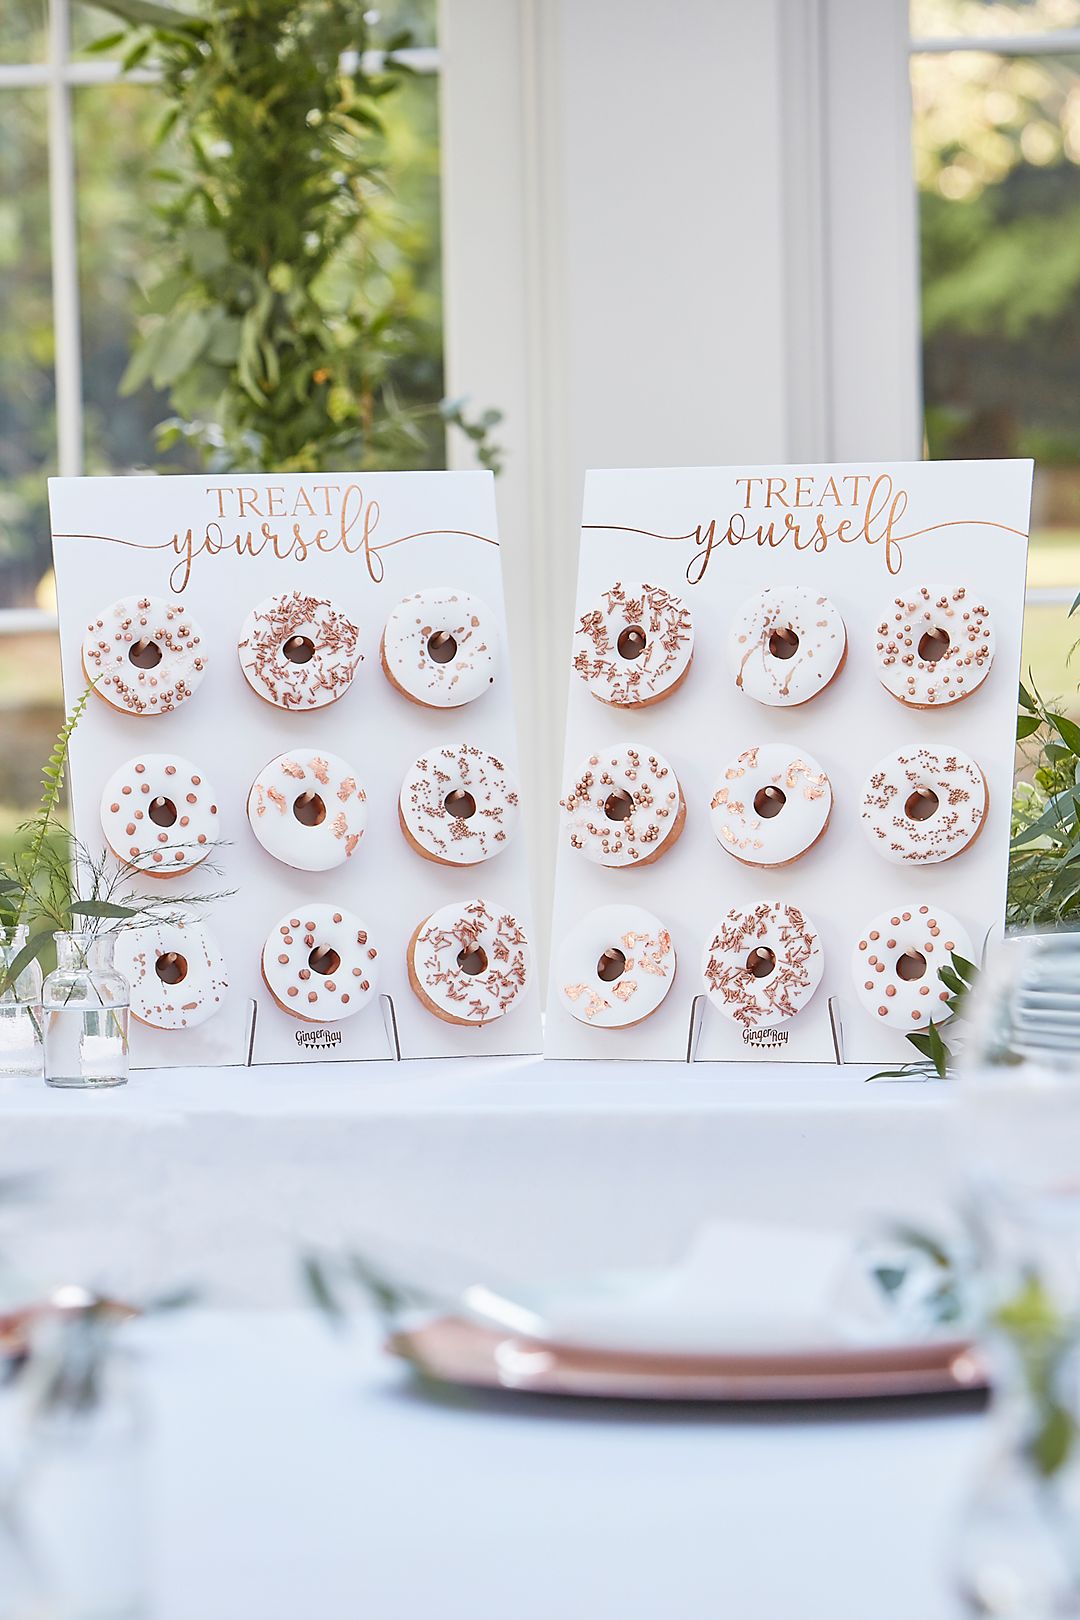 Rose Gold Treat Yourself Donut Wall Set Image 1